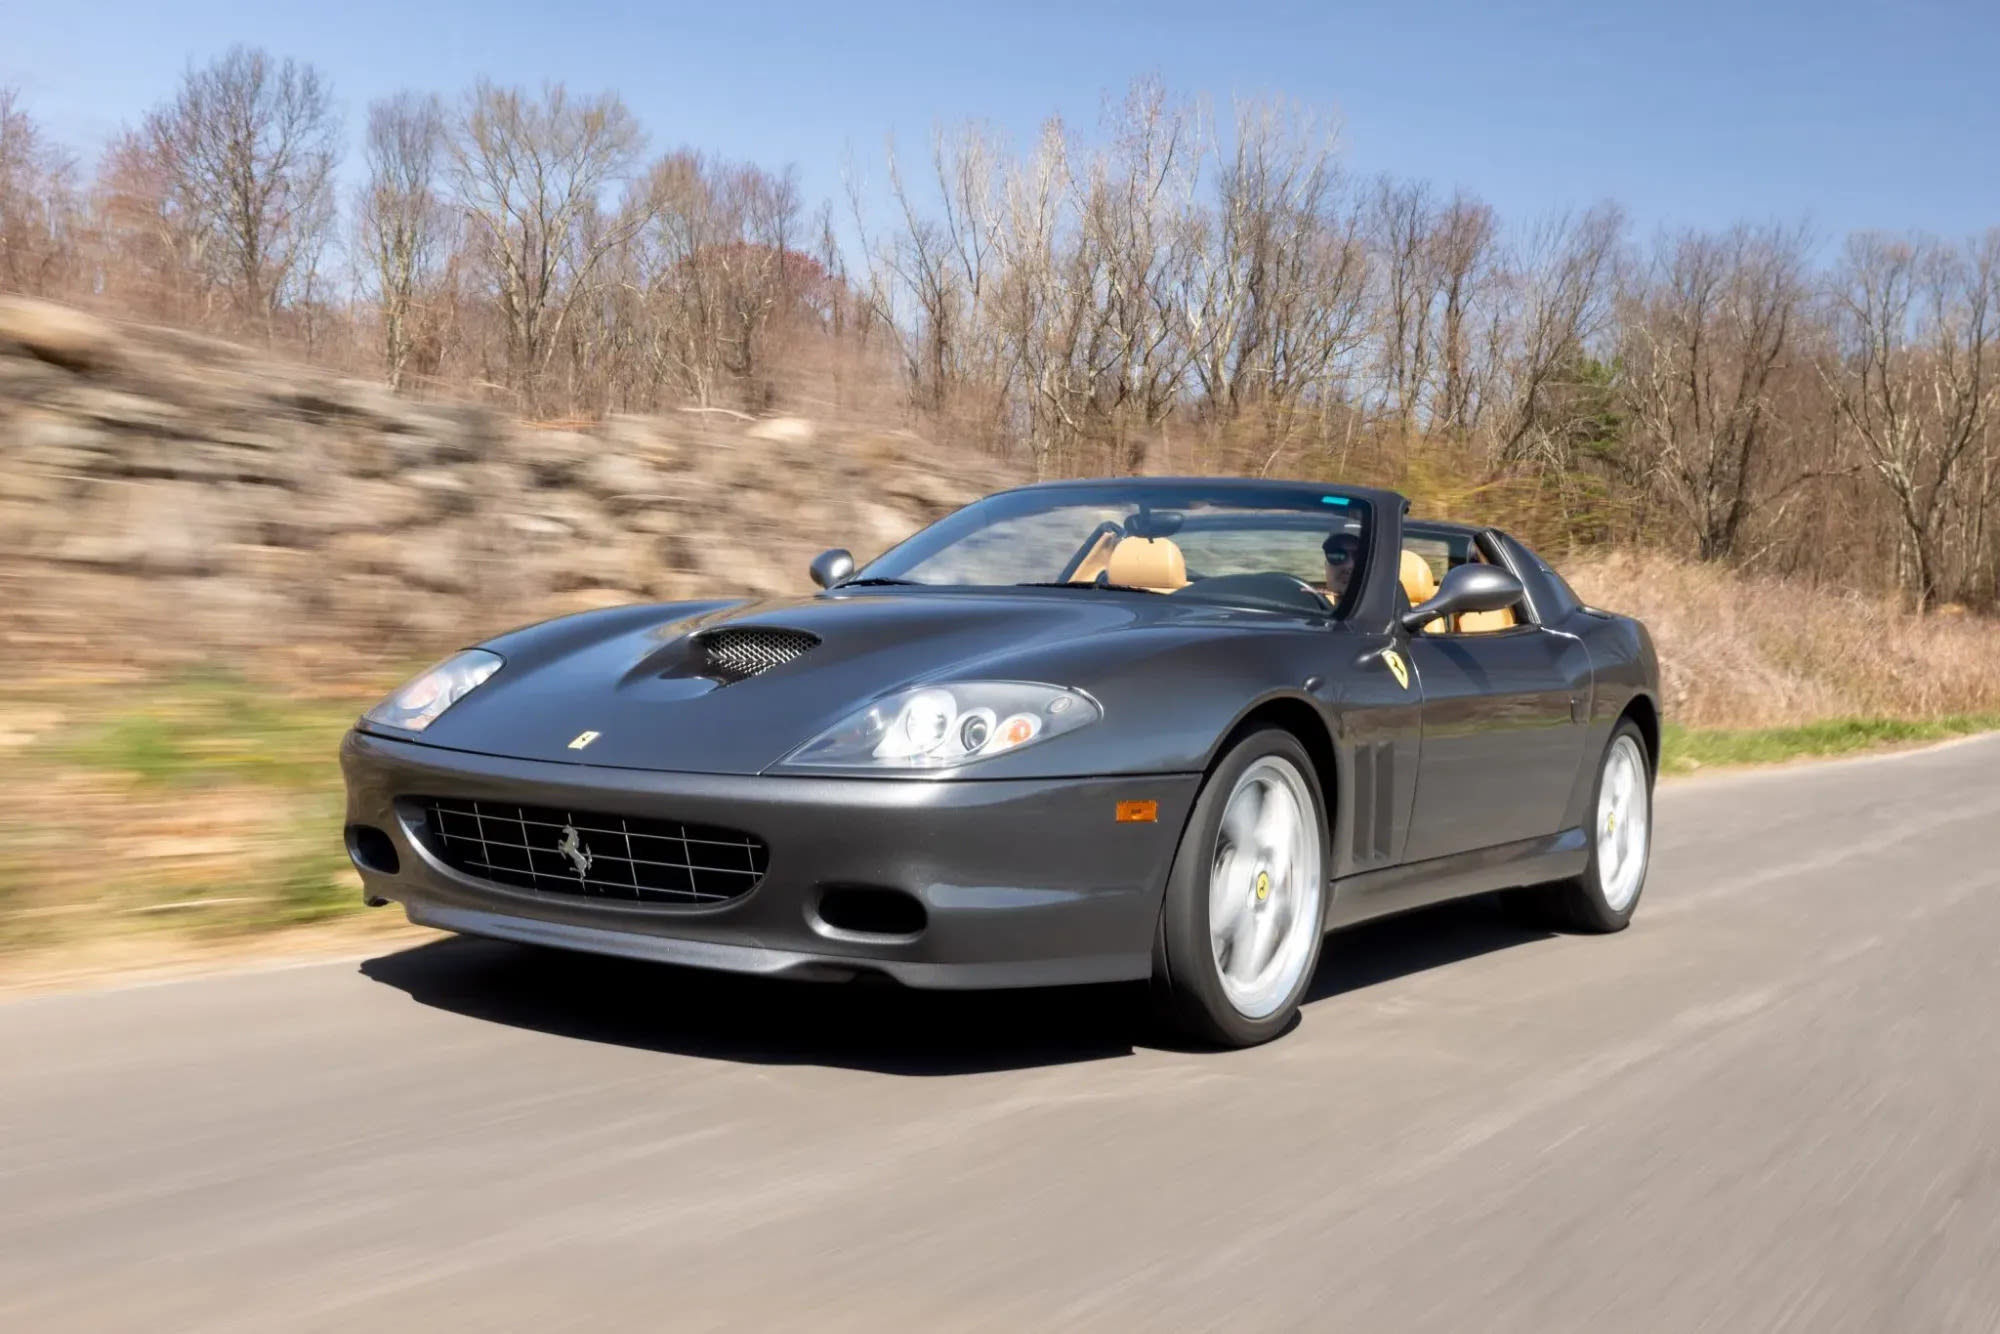 The Ferrari 575 Superamerica GTC Gives You the Best of Both Worlds